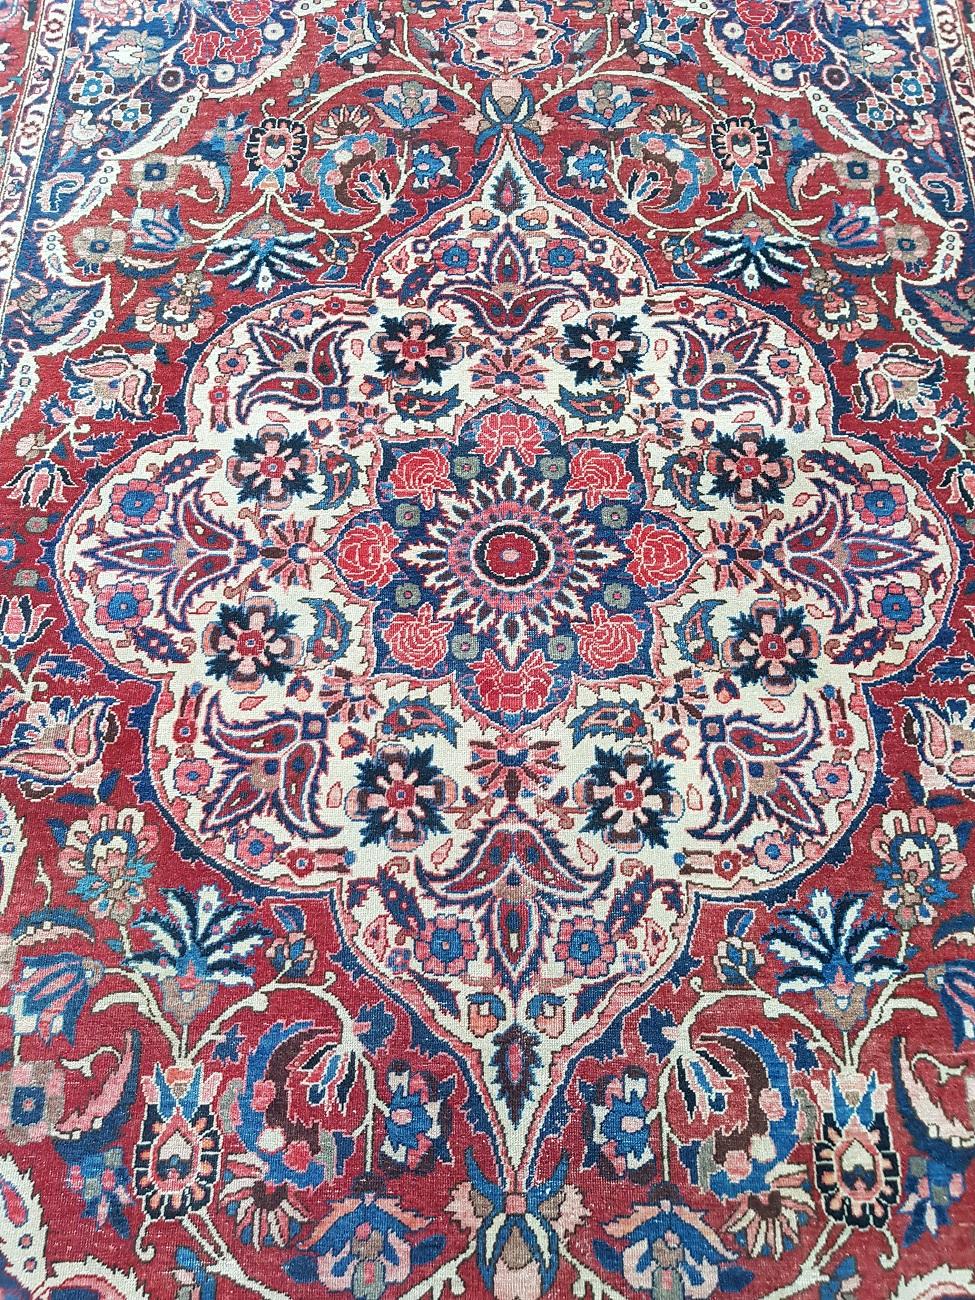 Vintage oriental hand-knotted woollen carpet with cotton warp with beautiful patterns and colors (light wear), Second half of the 20th century.

The measurements are,
Width 211 cm/ 83 inch.
Long 310 cm/ 122 inch.